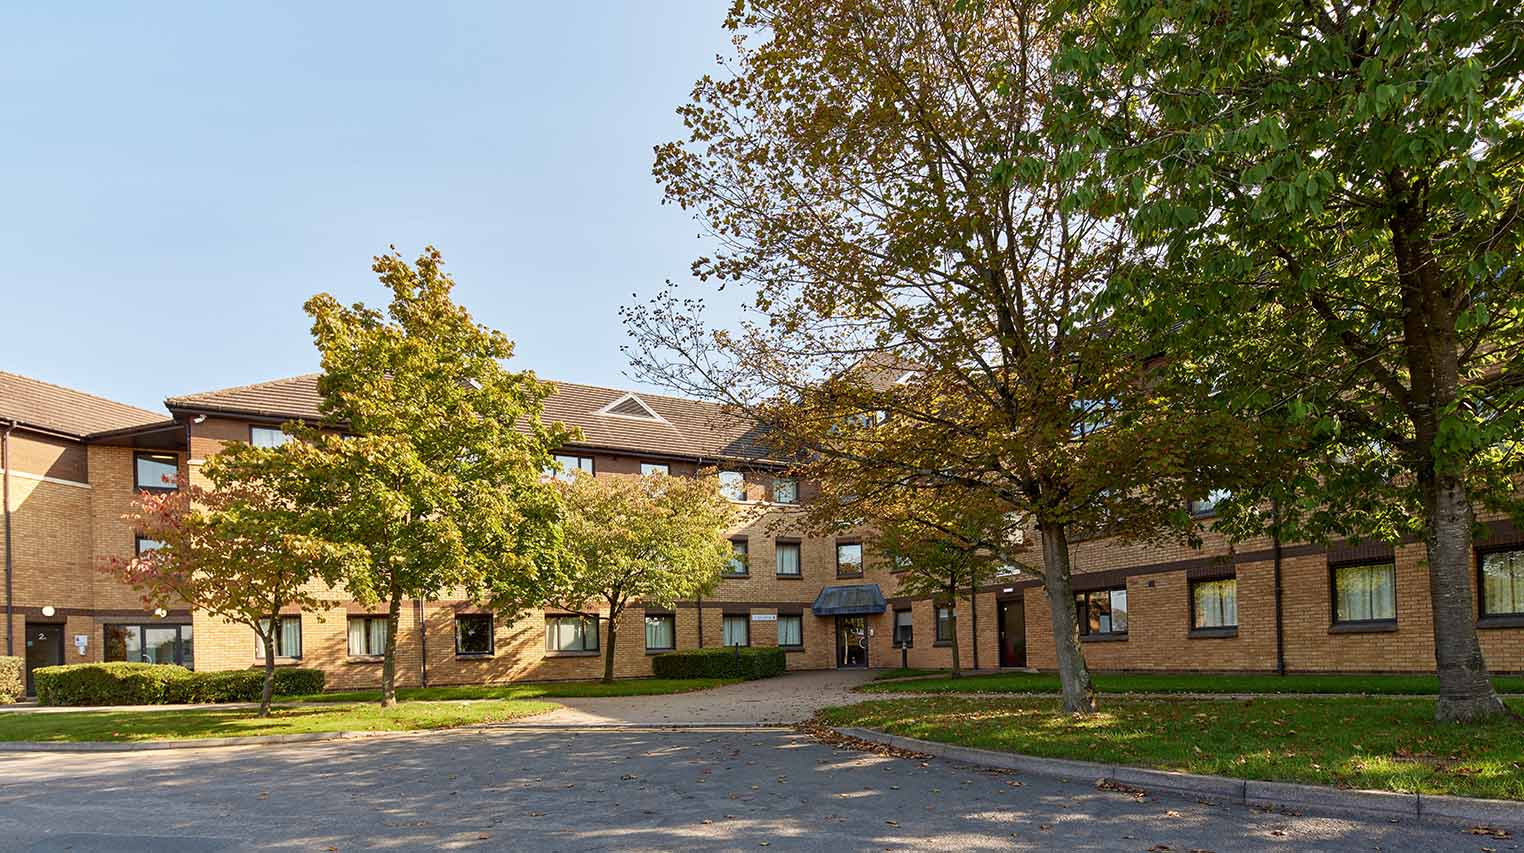 A picture of Scholars Green showing three-storey halls of residence built in an l-shape with trees in the foreground